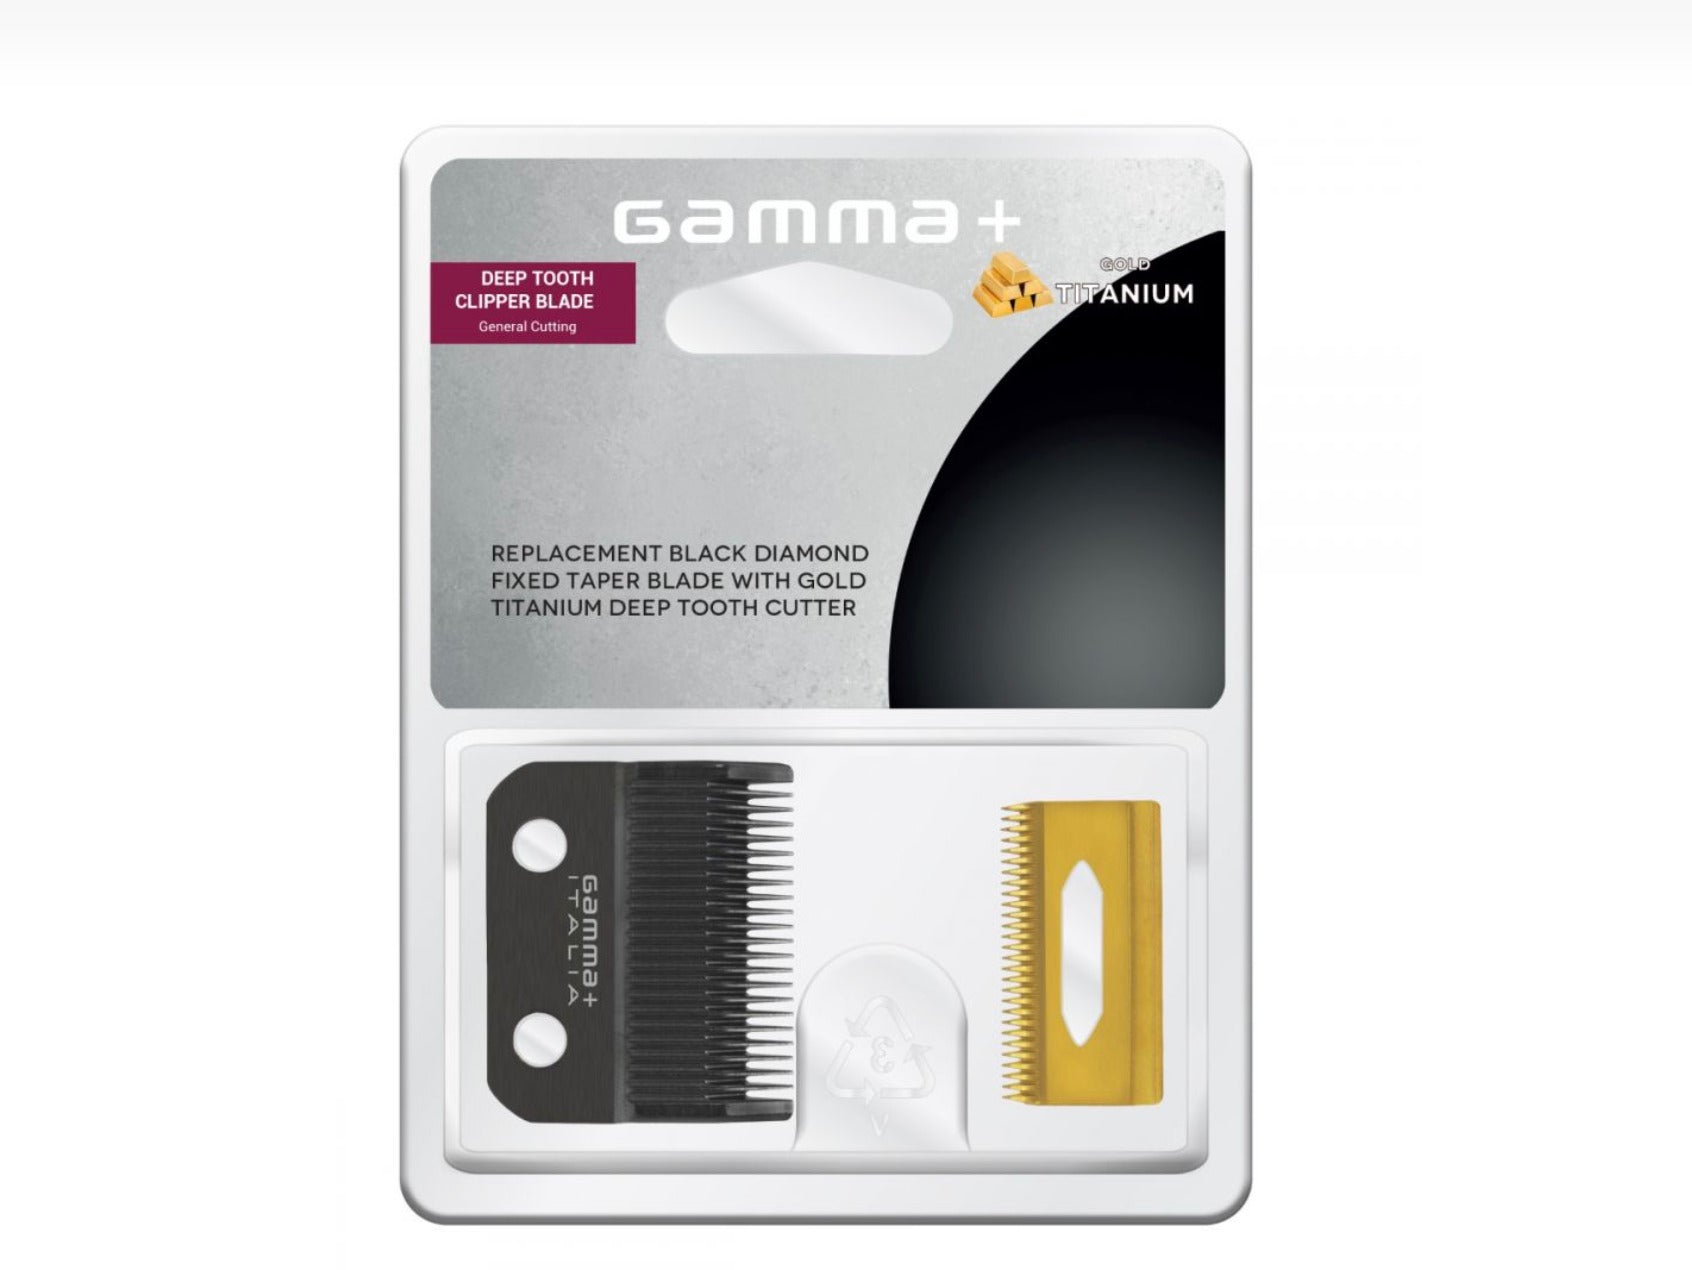 Gamma+ REPLACEMENT FIXED BLACK DIAMOND CARBON DLC TAPER CLIPPER BLADE WITH GOLD MOVING TITANIUM DEEP TOOTH CUTTER SET